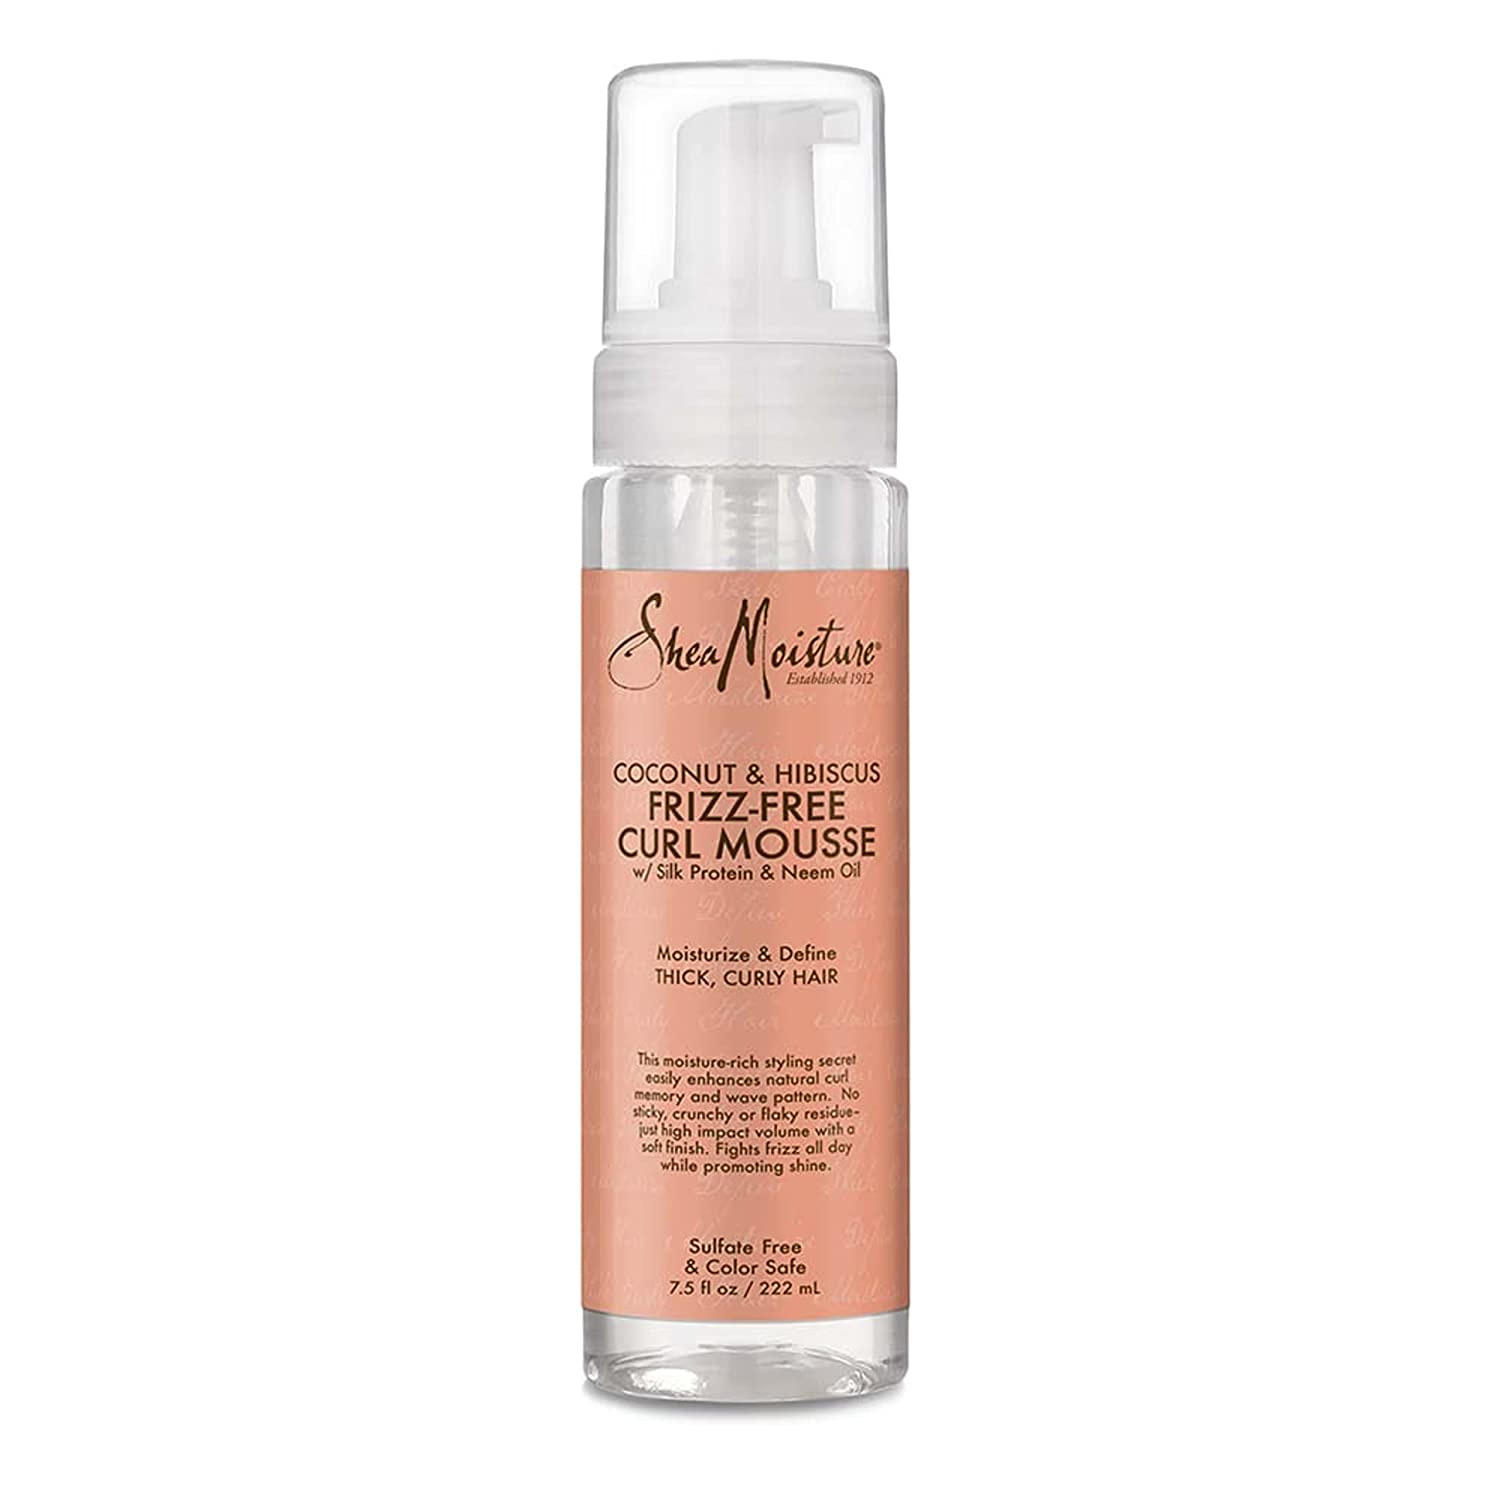 SheaMoisture Frizz-Free Curl Mousse Volumizing Curly Hair Product